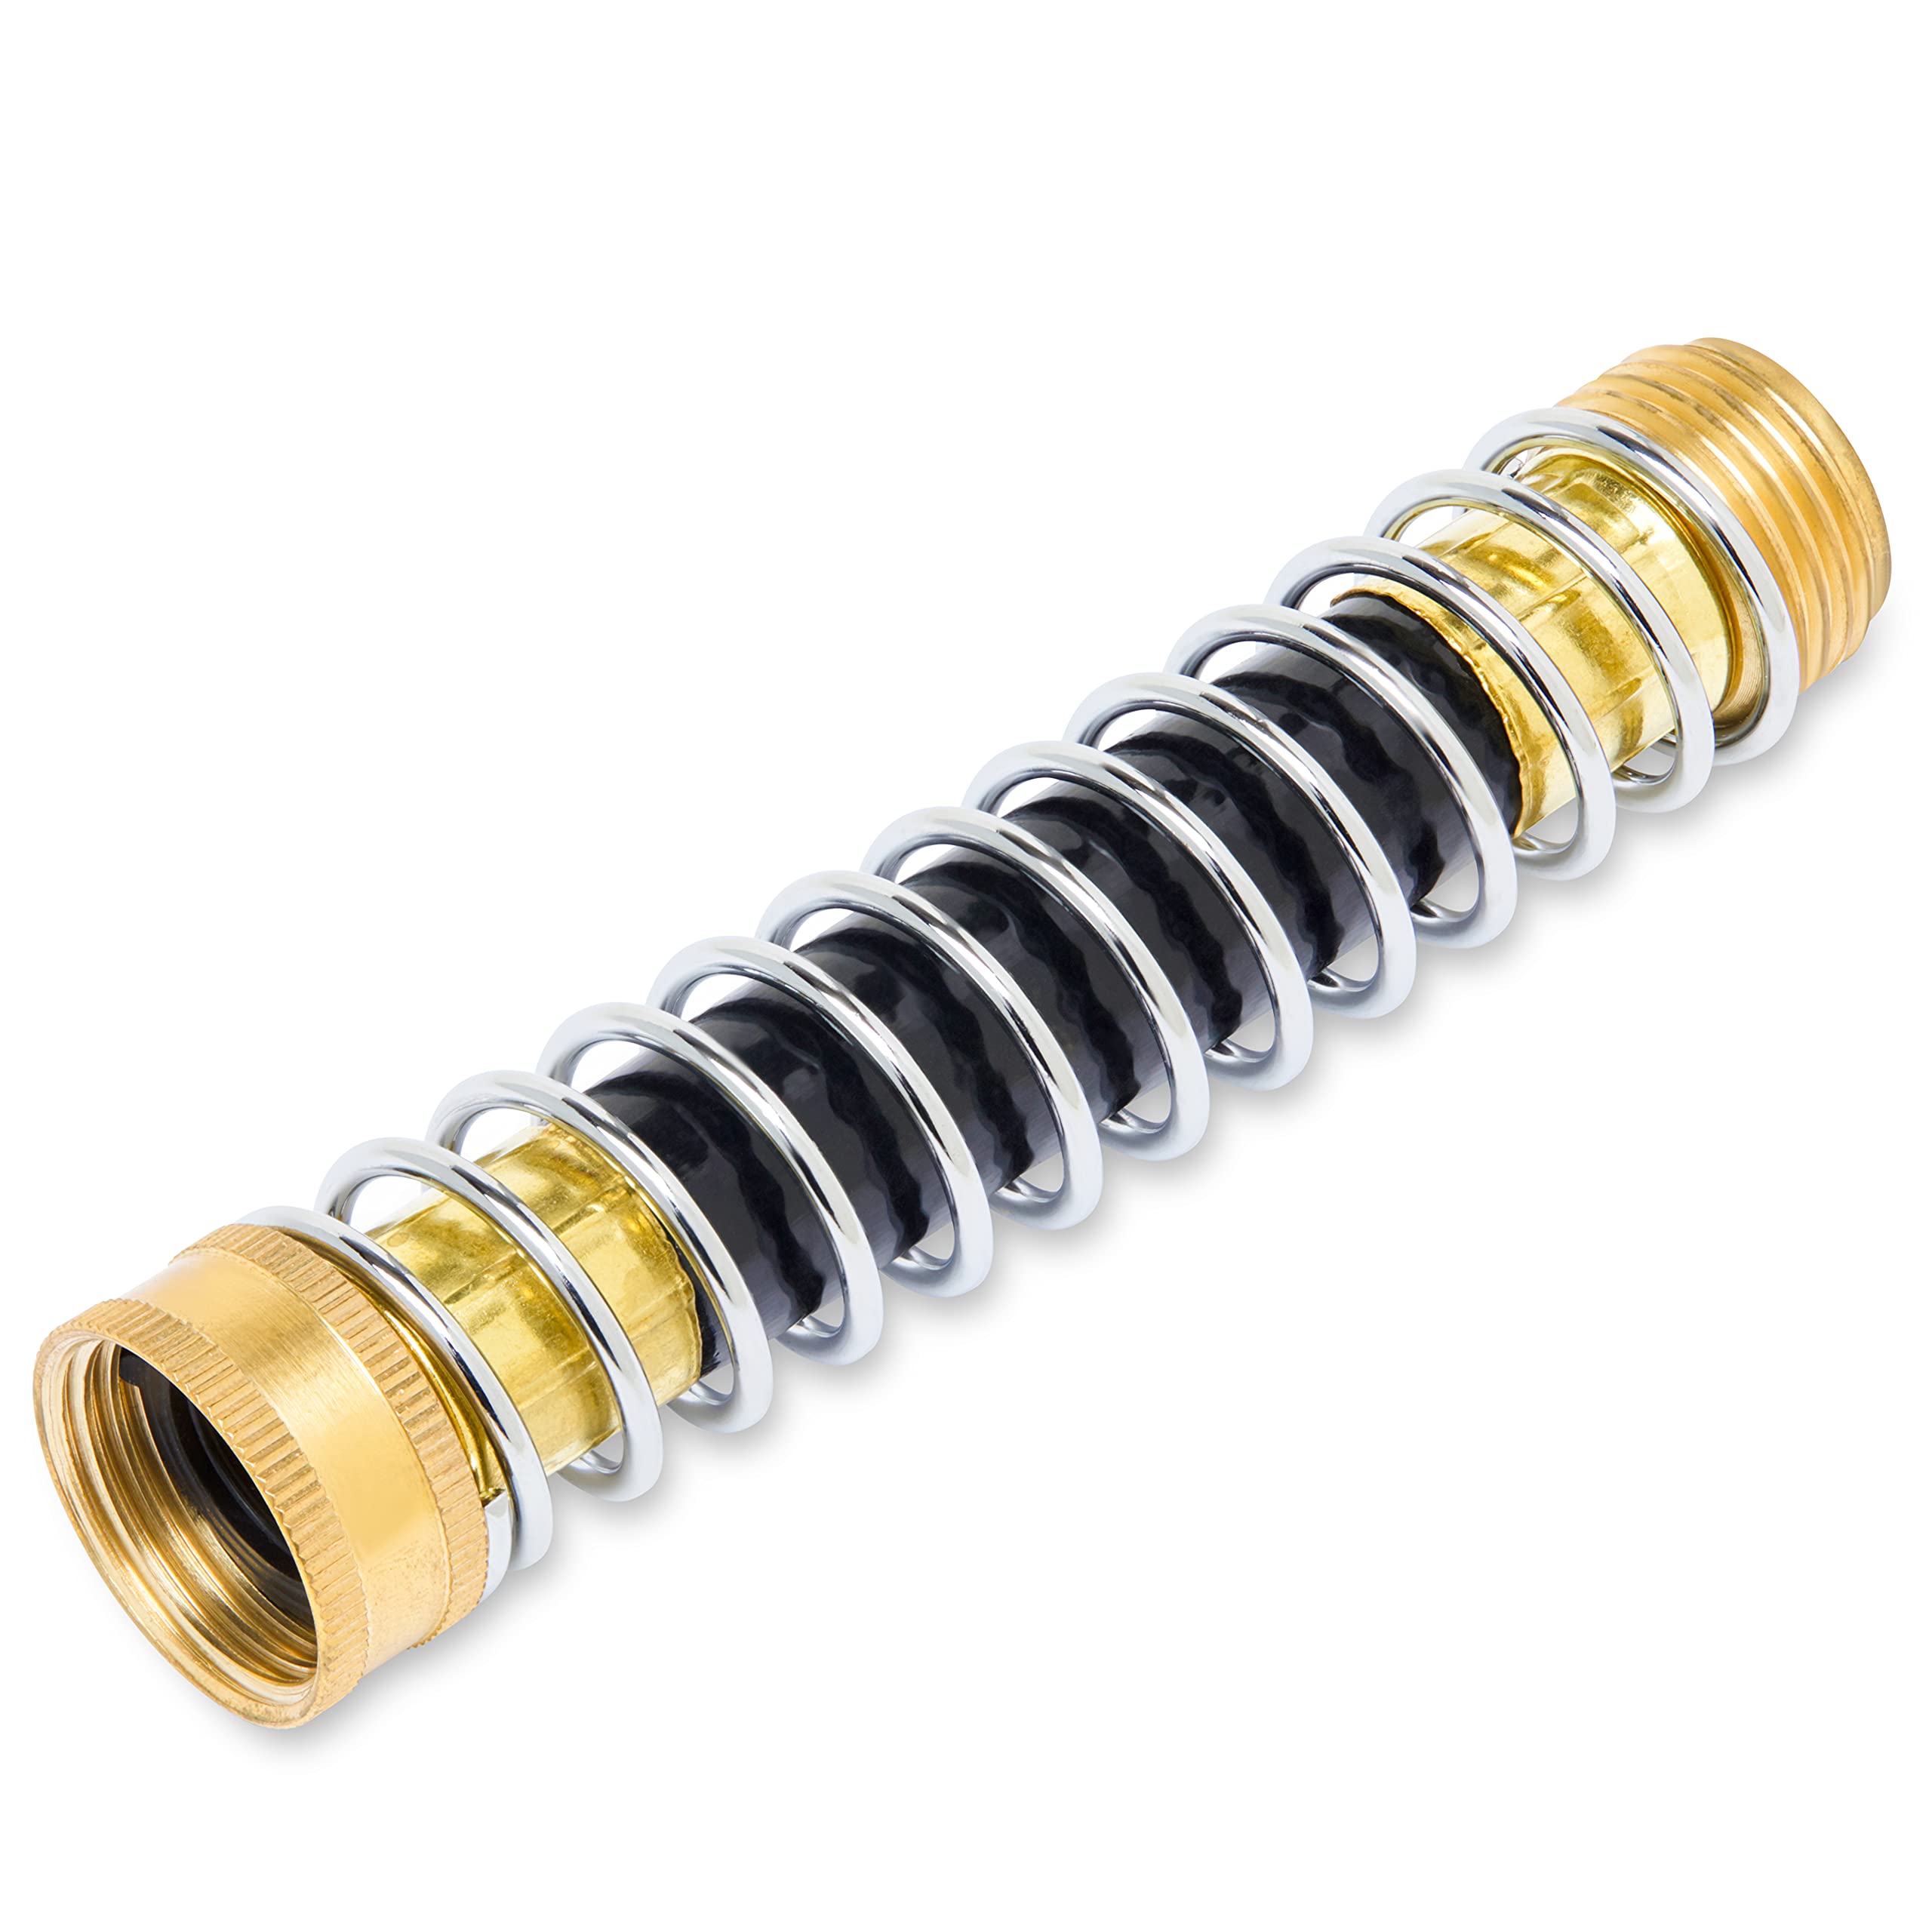 Morvat Brass Coiled Garden Hose Kink & Strain Protector, Hose Extension Connector for Outdoor Water Valve & Faucet, Adapter & Attachment with ¾” Standard Threading, Includes 8 Washers & Tape, 4 Pack